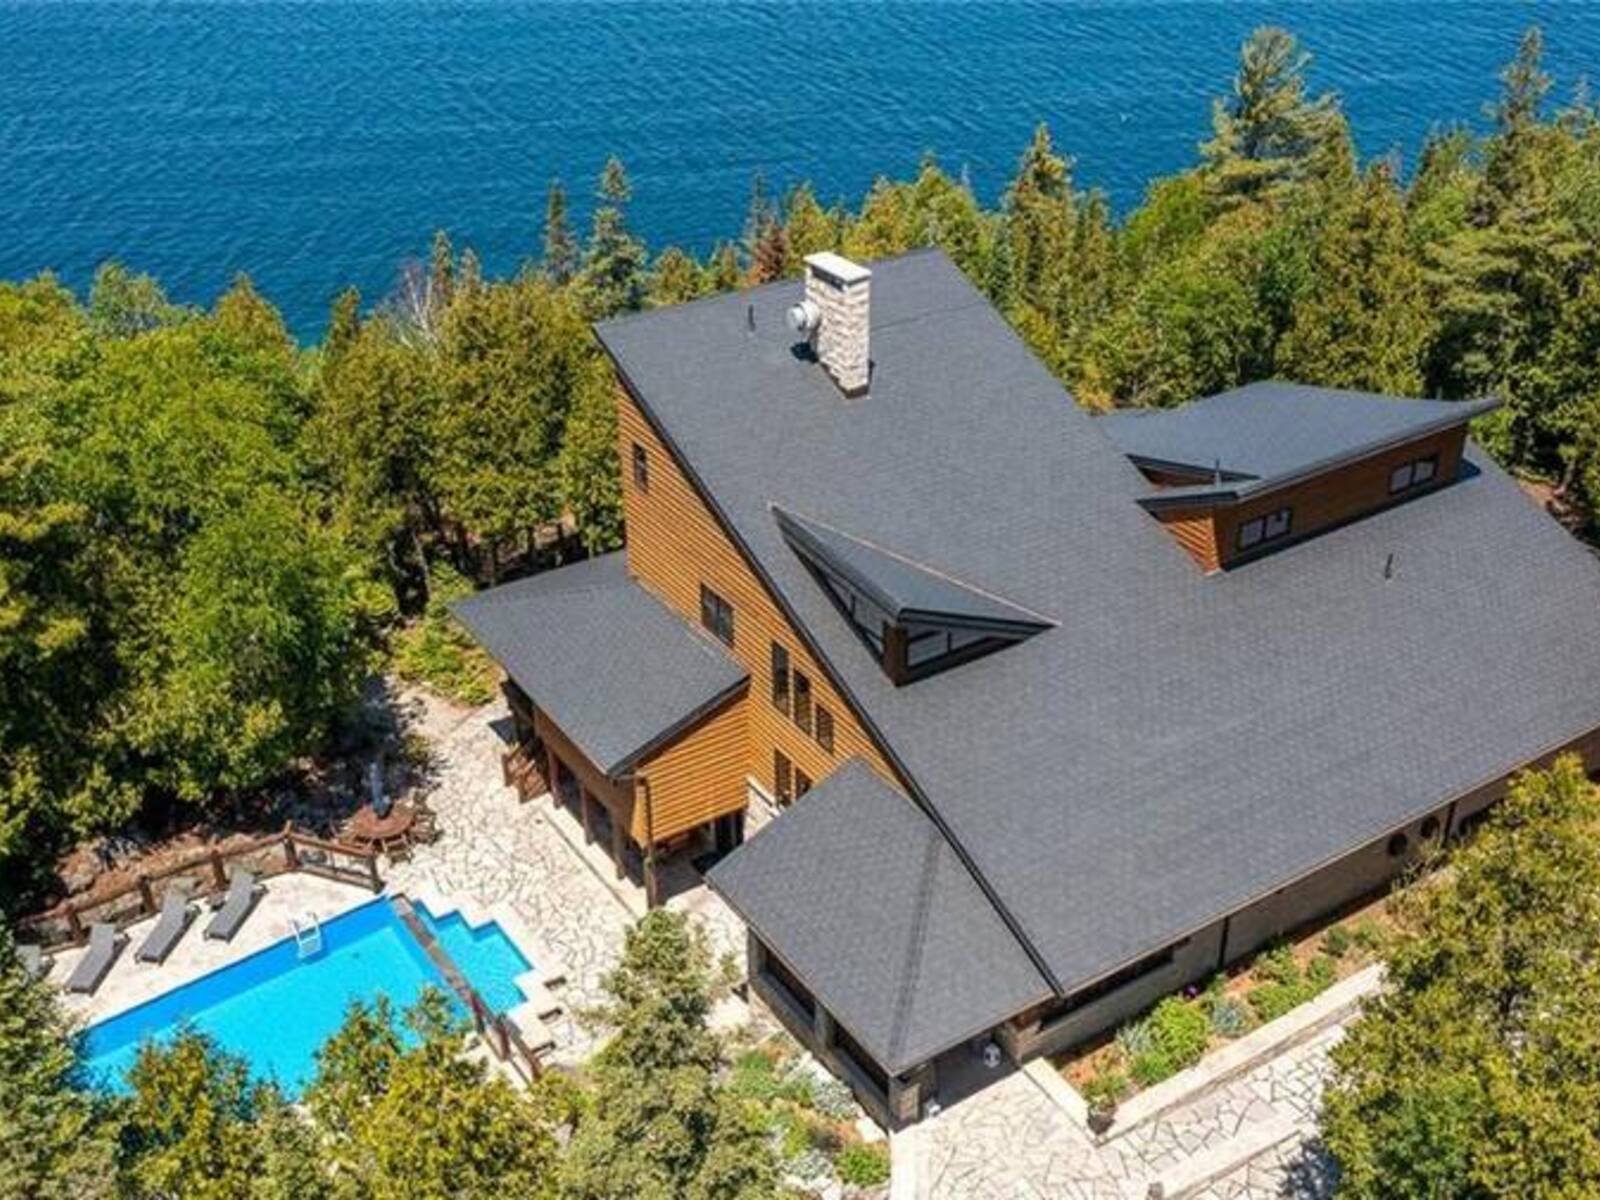 201 LITTLE COVE Road, Tobermory, Ontario N0H 2R0